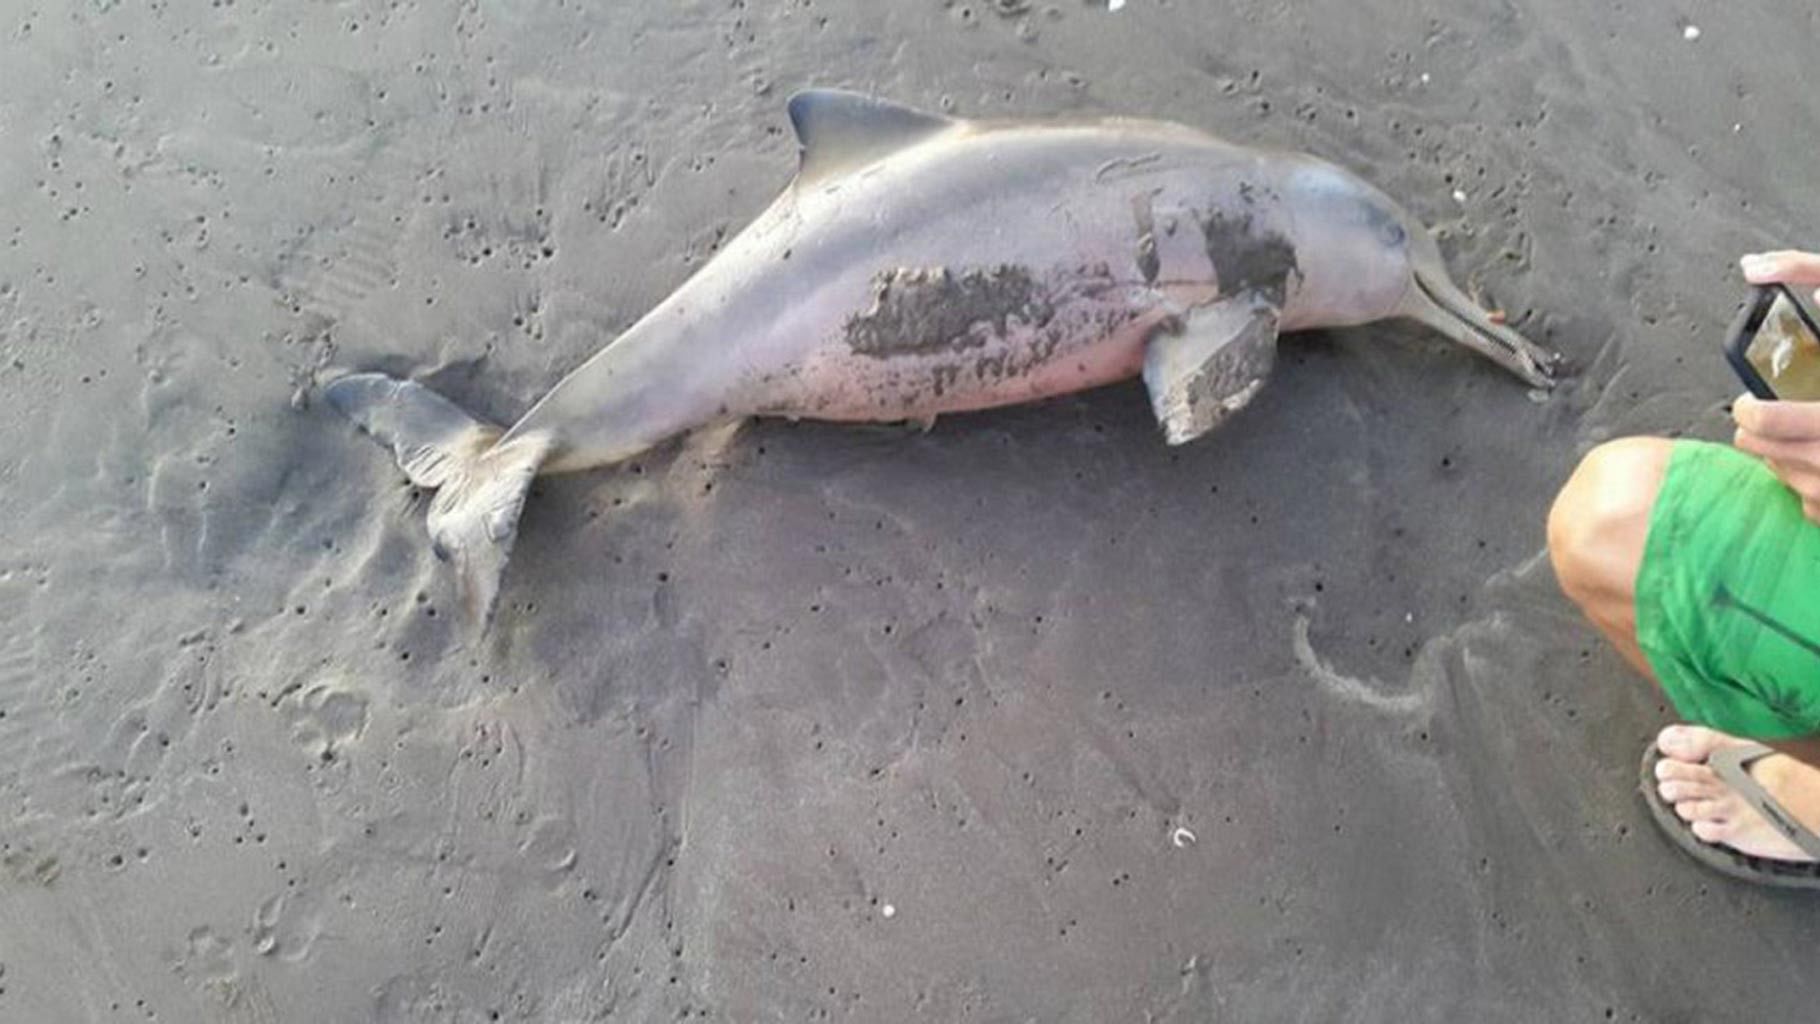 Baby dolphin left discarded on beach after it dies. (Photo: <a href="http://www.thesun.co.uk/sol/homepage/news/6938412/Shocking-moment-tourist-killed-baby-dolphin-by-parading-it-along-beach-so-holidaymakers-could-take-selfies.html">The Sun</a>)